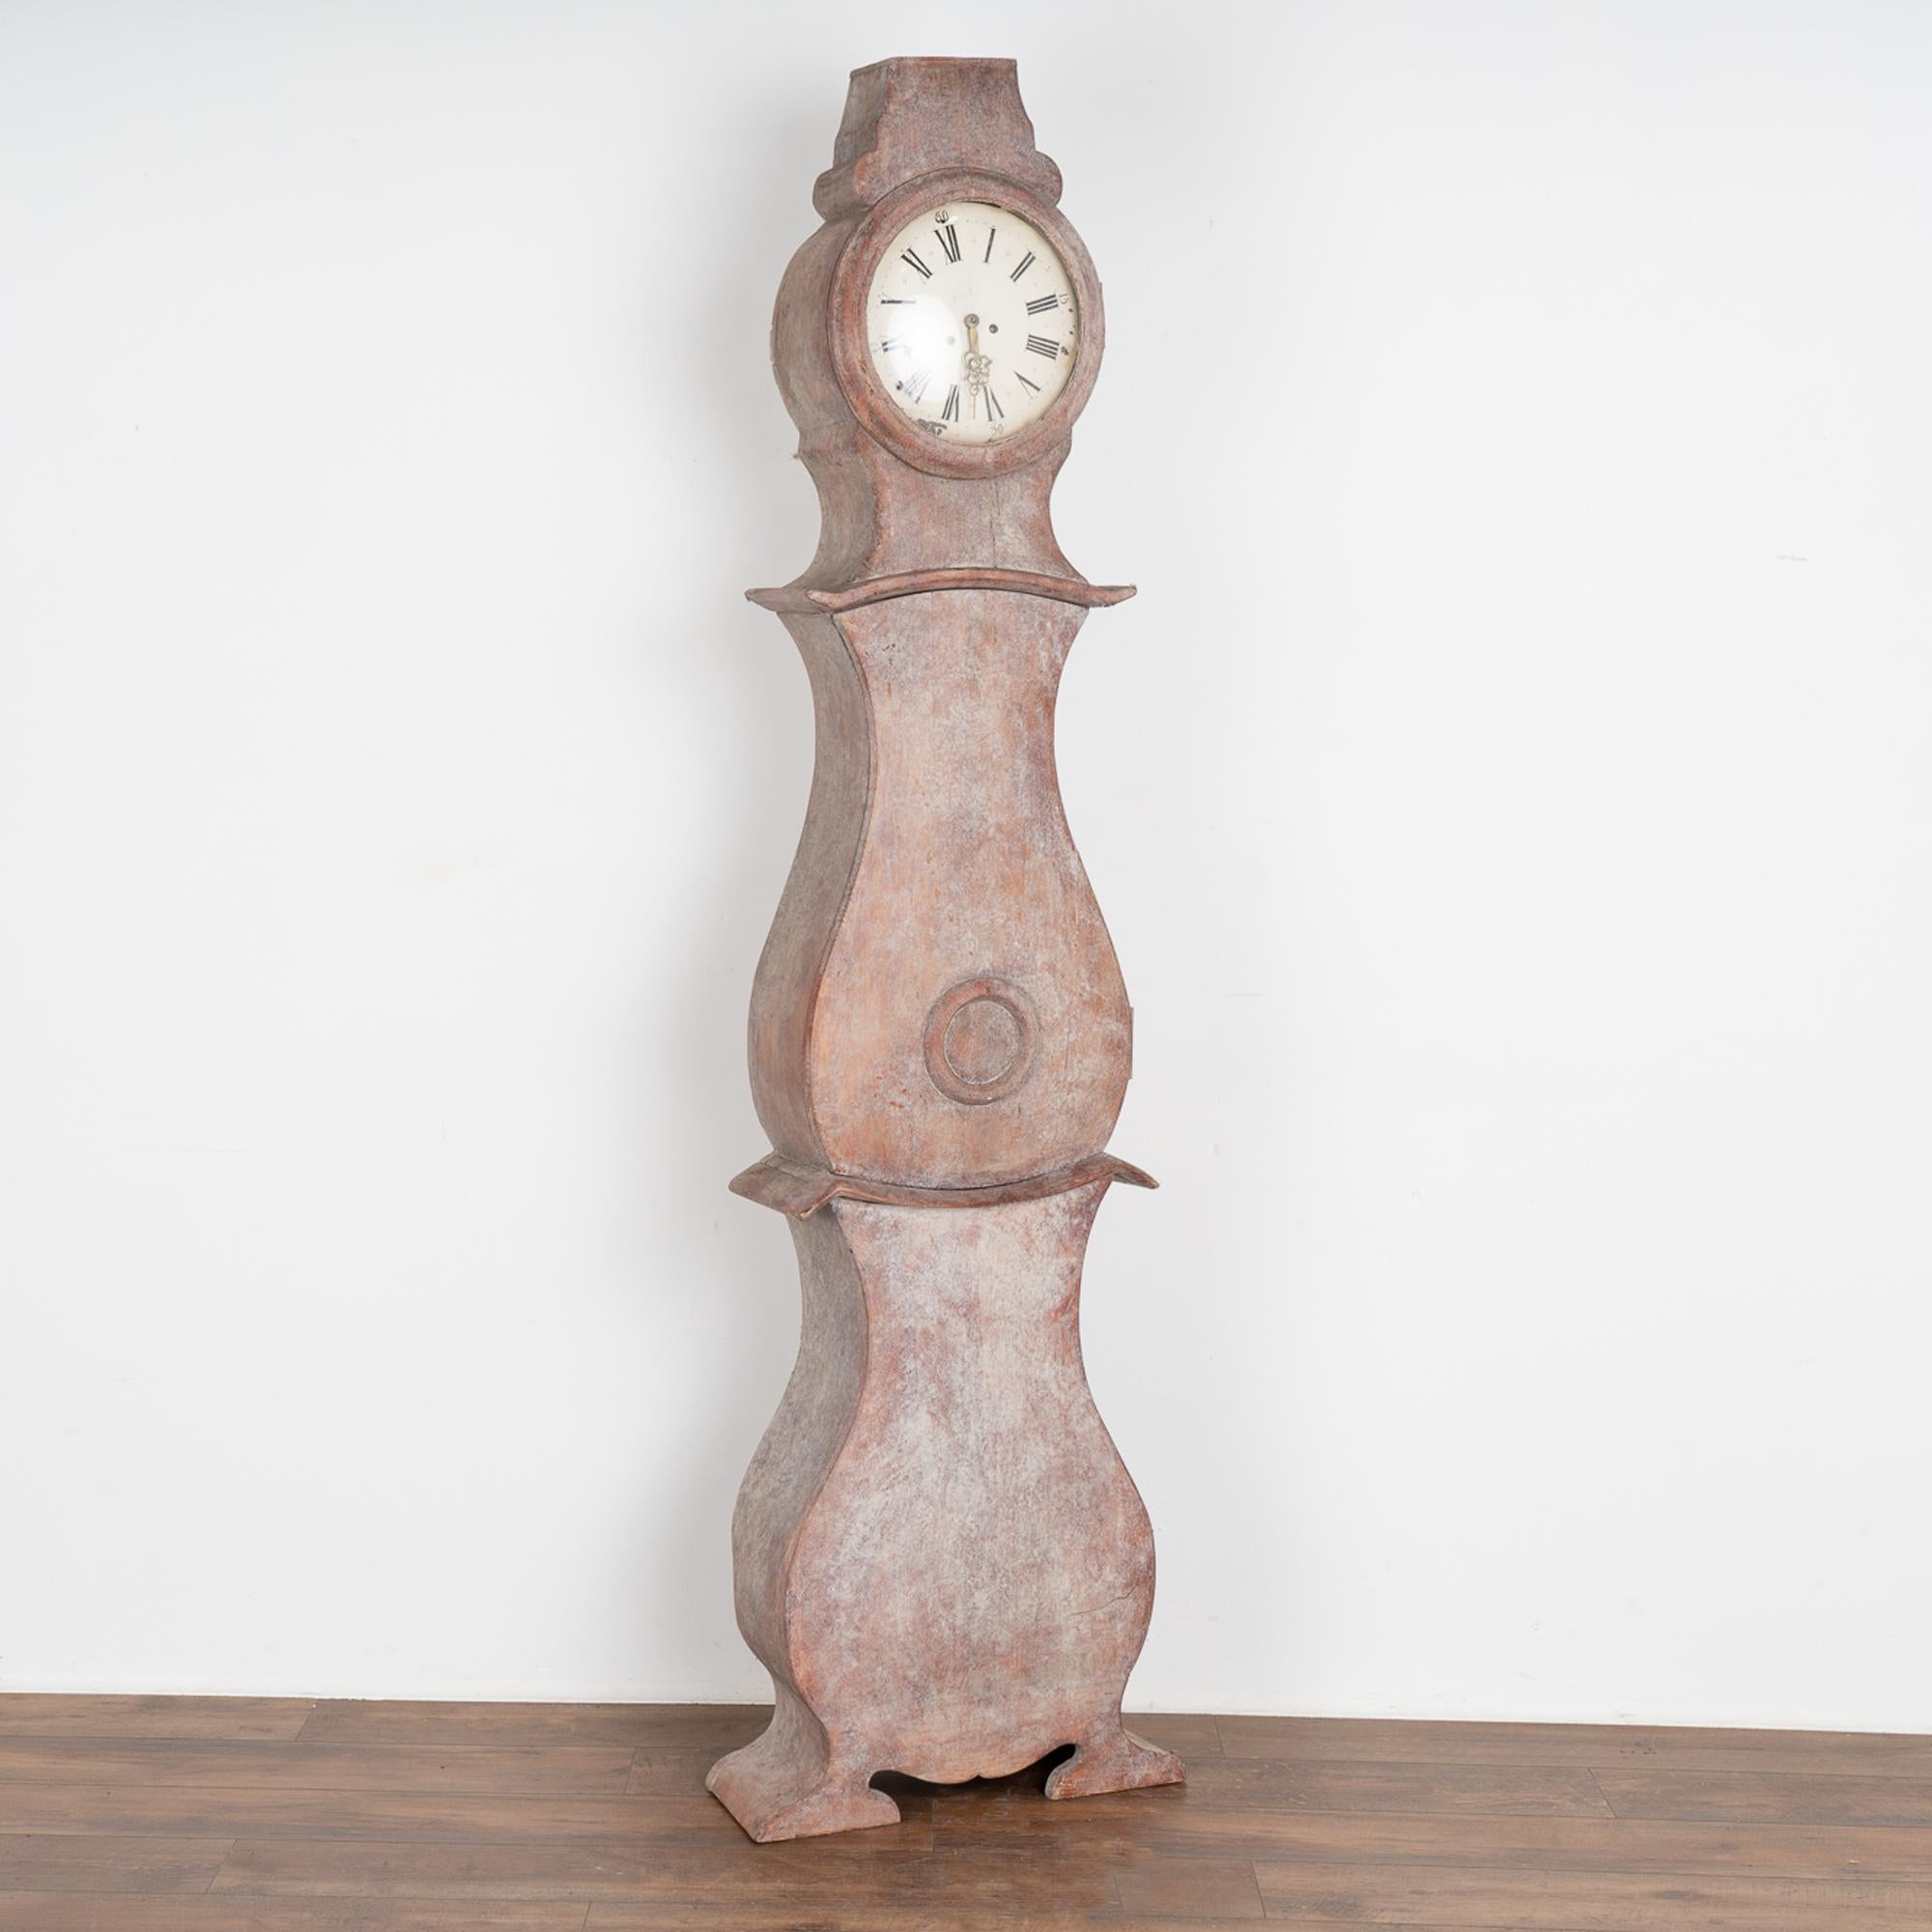 Graceful curves and unique lines create the attractive silhouette of this Swedish mora grandfather clock.
Newer professionally applied painted finish with layers of plum, white and gray are lightly distressed to fit the age of clock.
Original clock